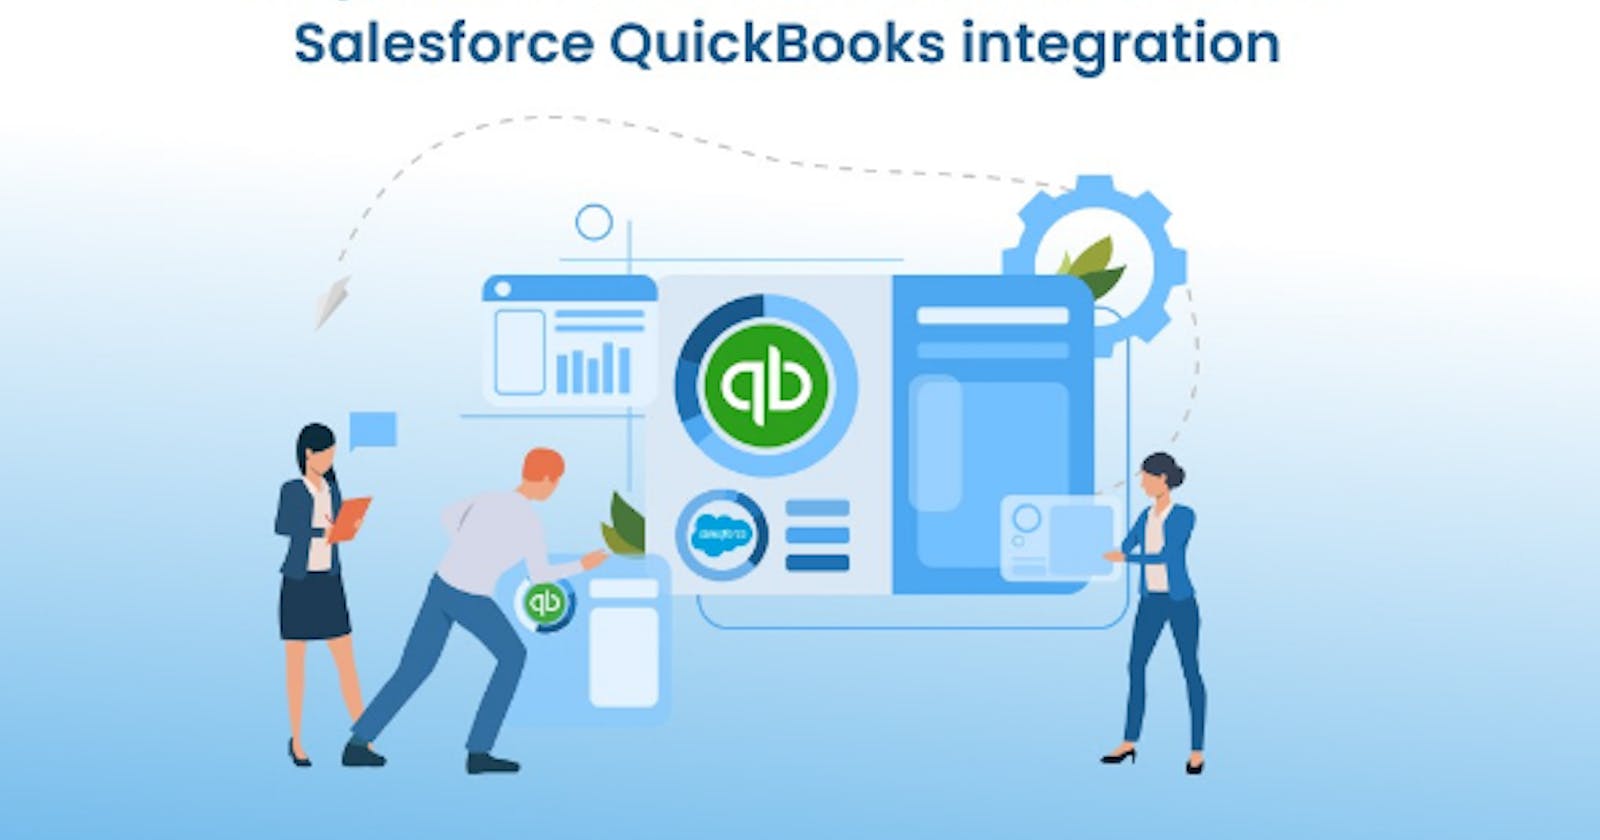 All you need to know about Benefits of Salesforce QuickBooks integration